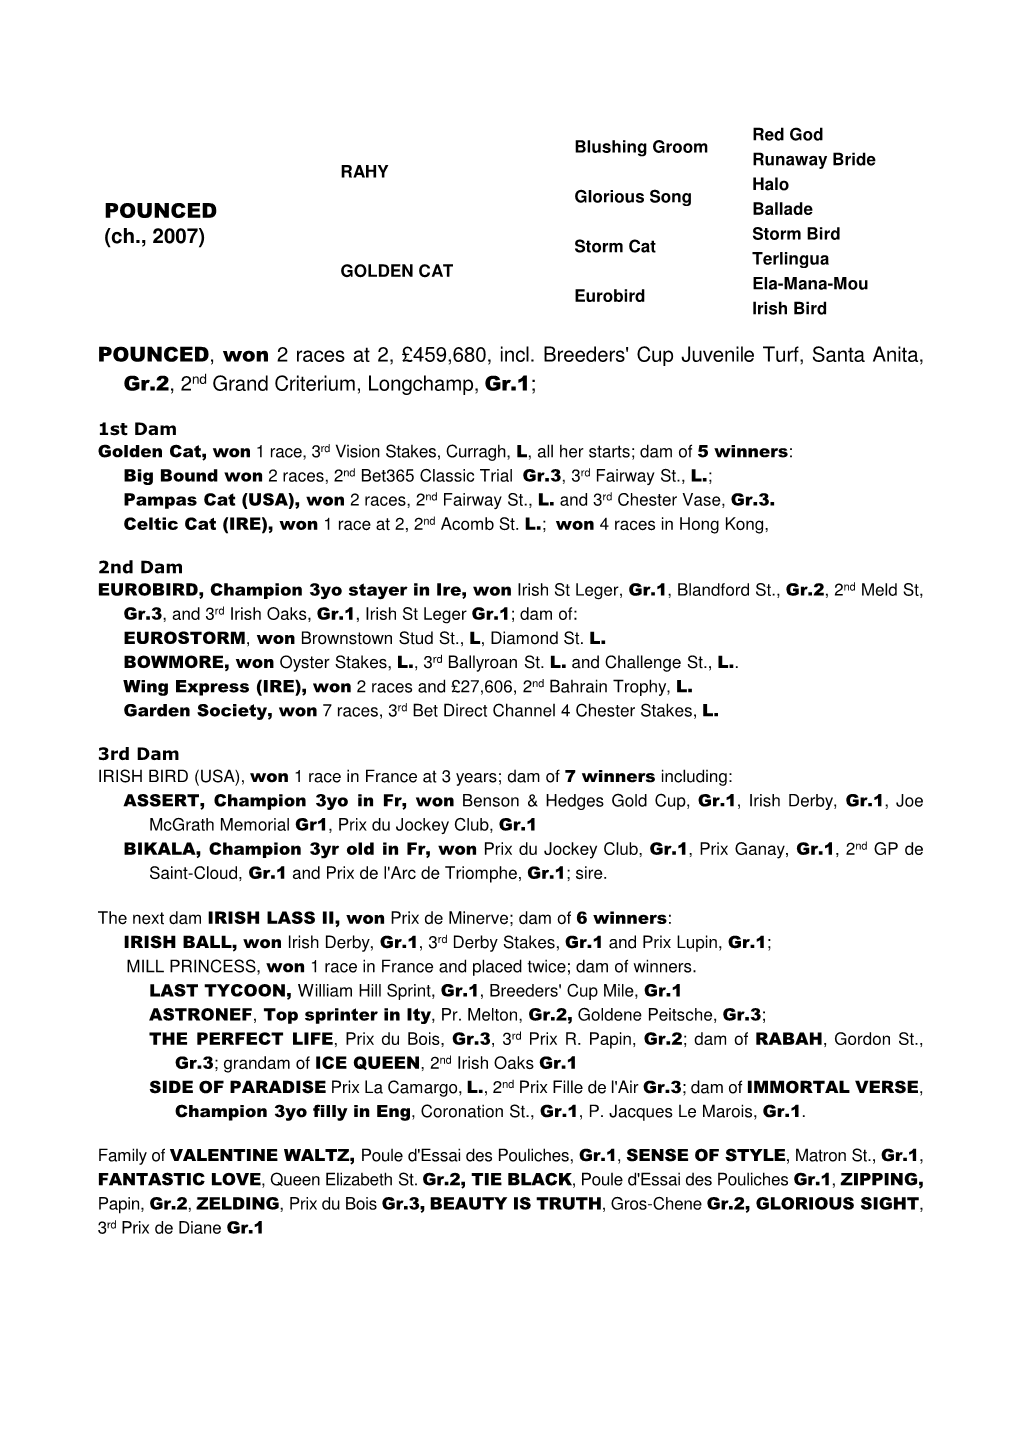 POUNCED, Won 2 Races at 2, £459680, Incl. Breeders' Cup